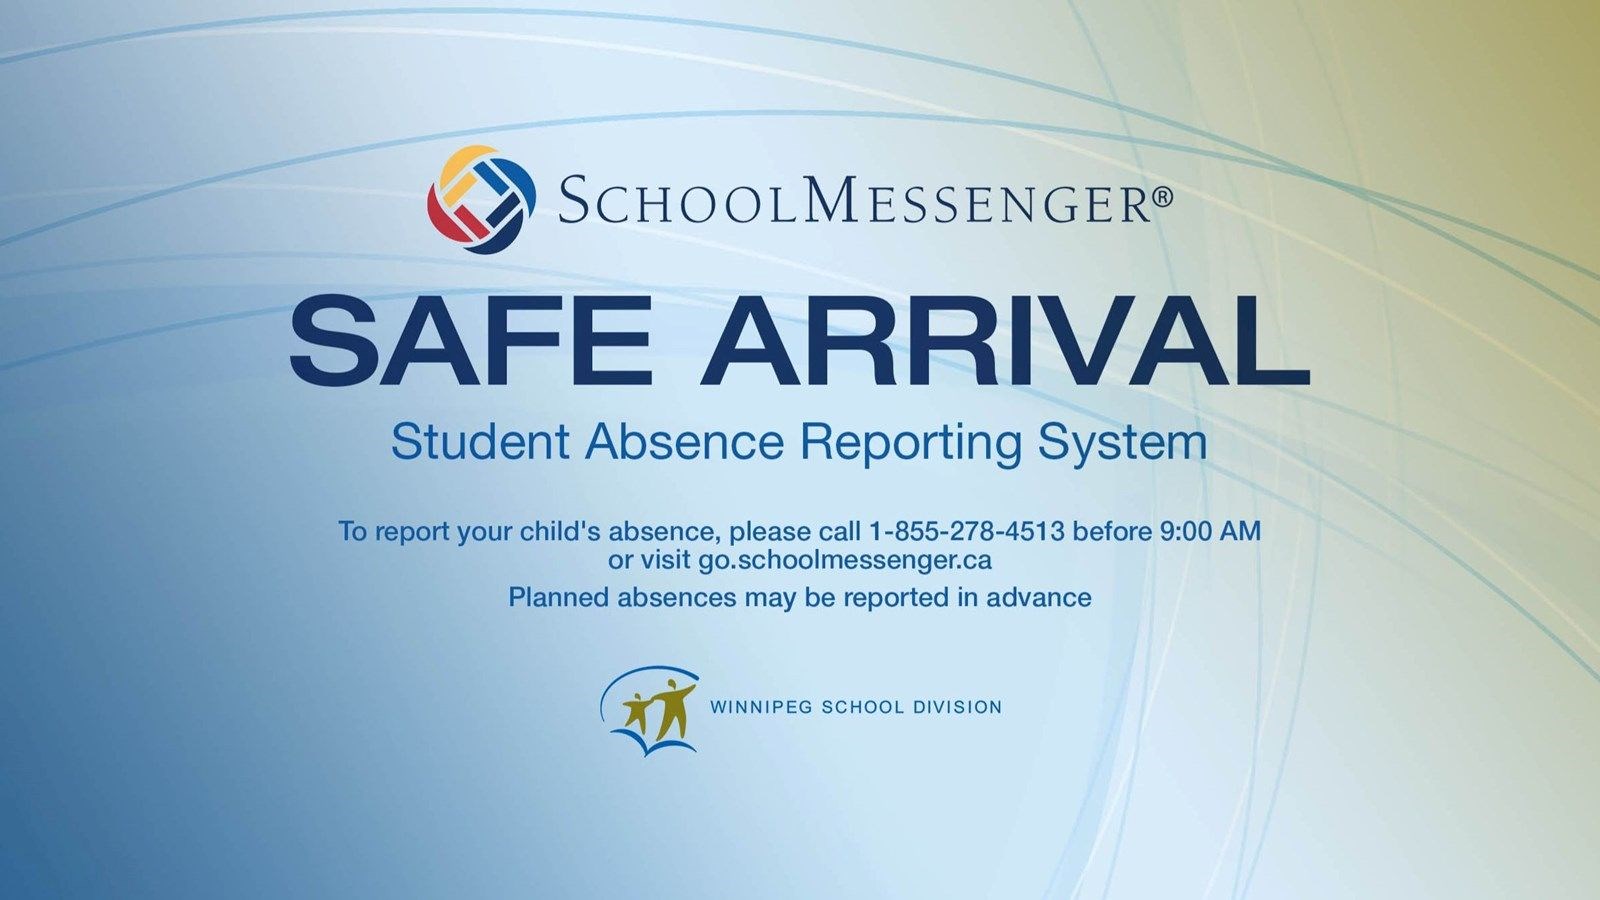 SAFE ARRIVAL (AND REPORTING ABSENCES)